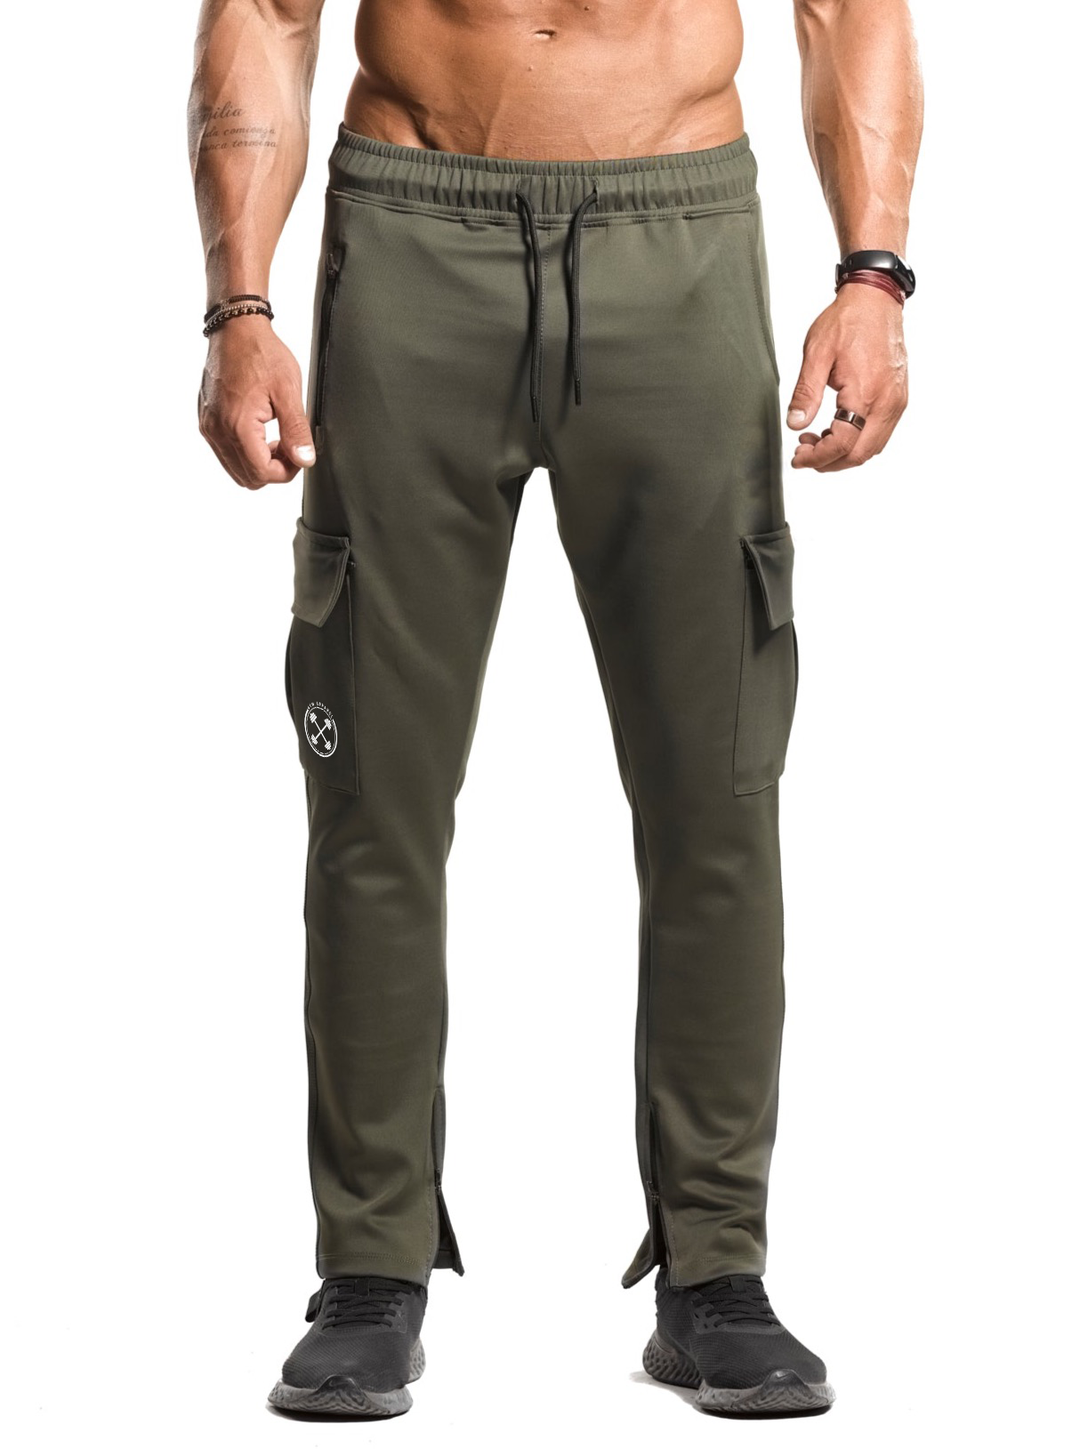 Tapered Cargo Zip Joggers - UPG [Olive Green] - Sweatpants/Joggers - Gym Apparel Egypt